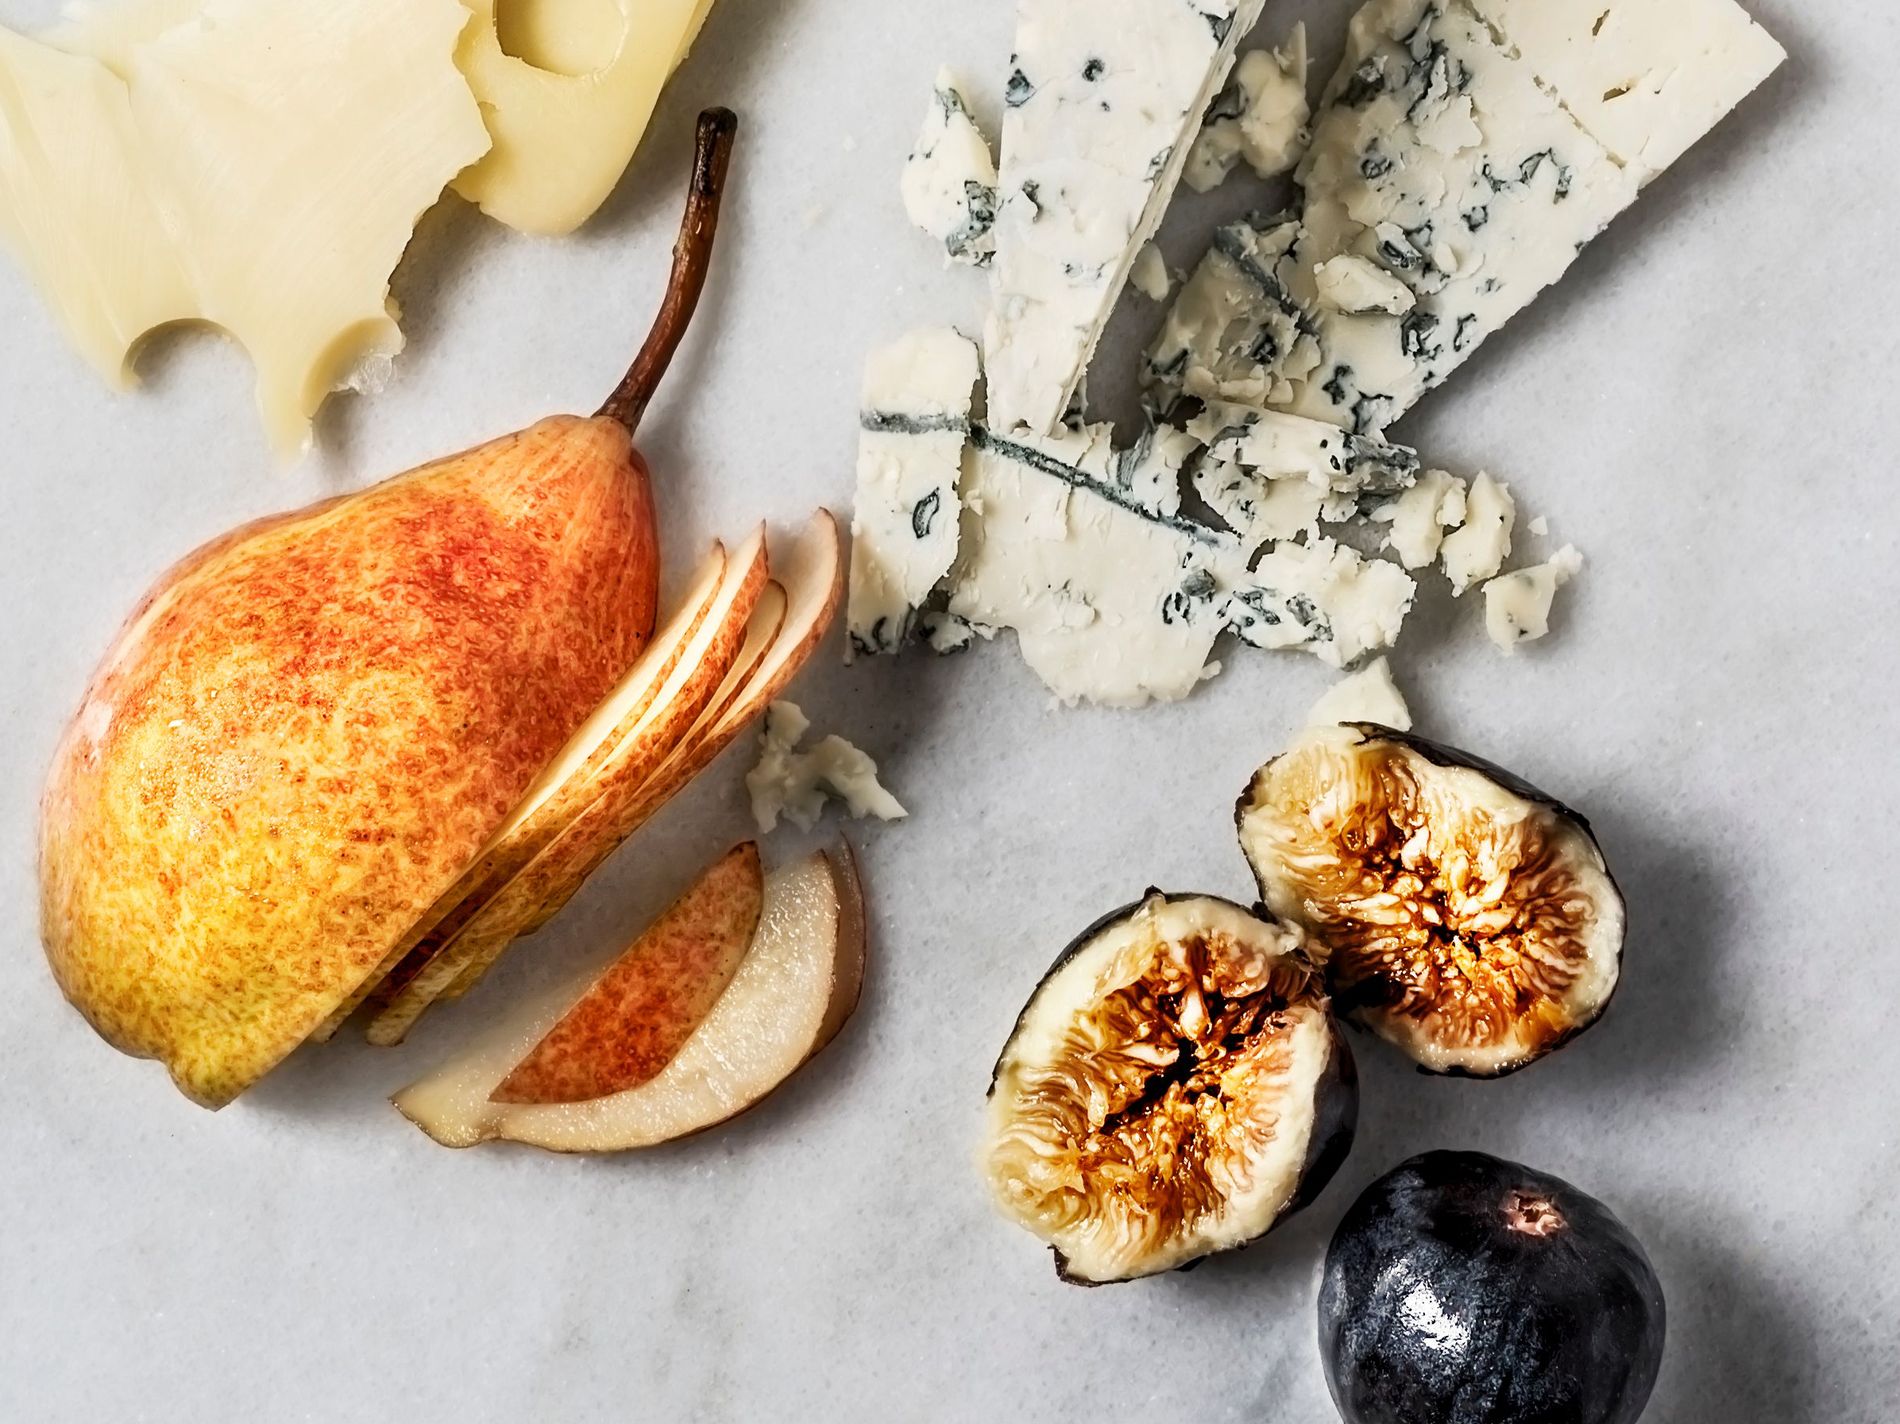 Blue cheese figs